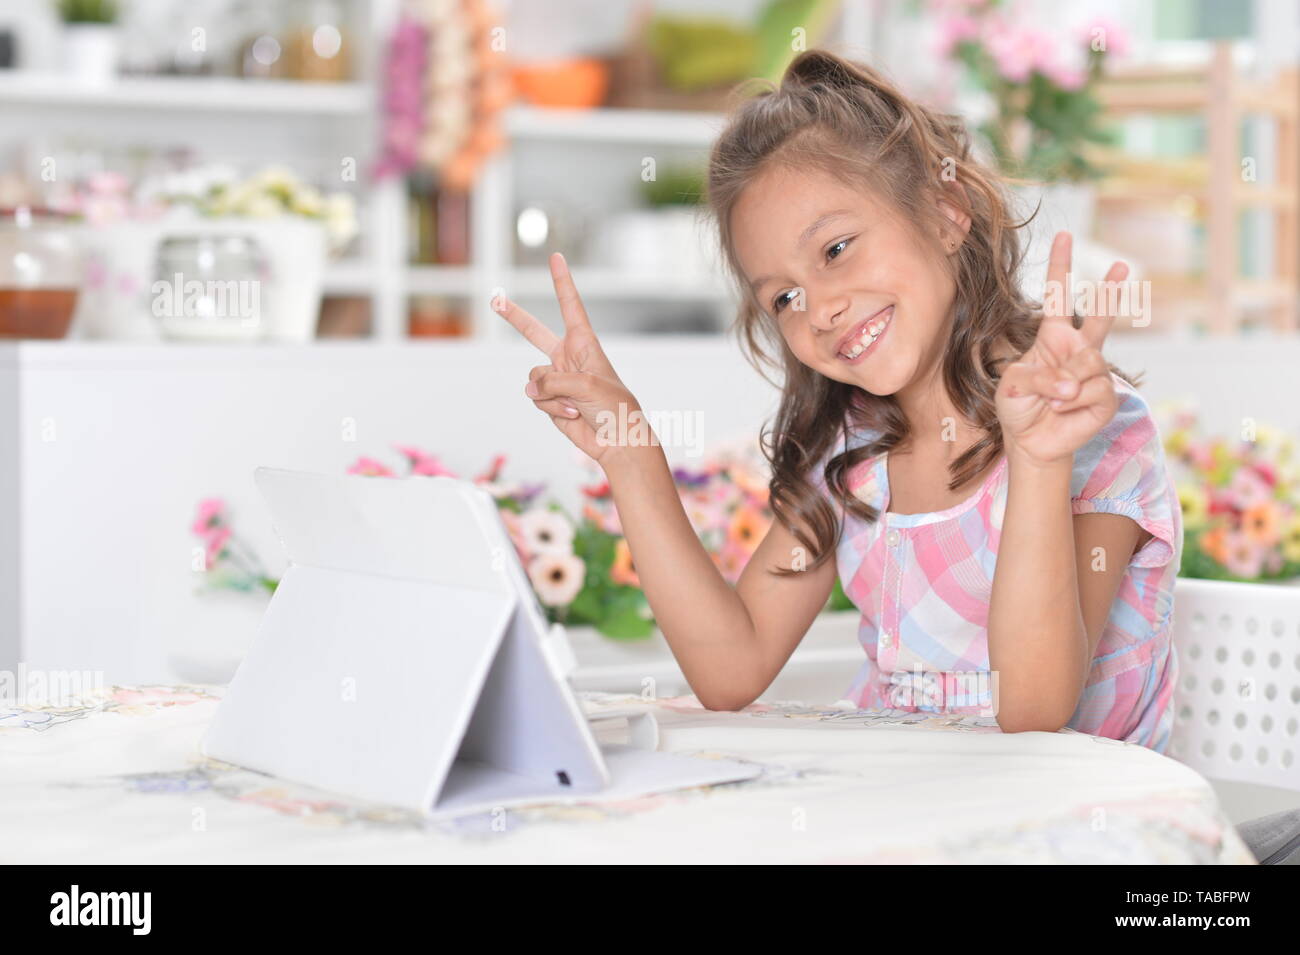 Portrait of cute little girl sitting at kitchen table in front of laptop and showing peace signs Stock Photo